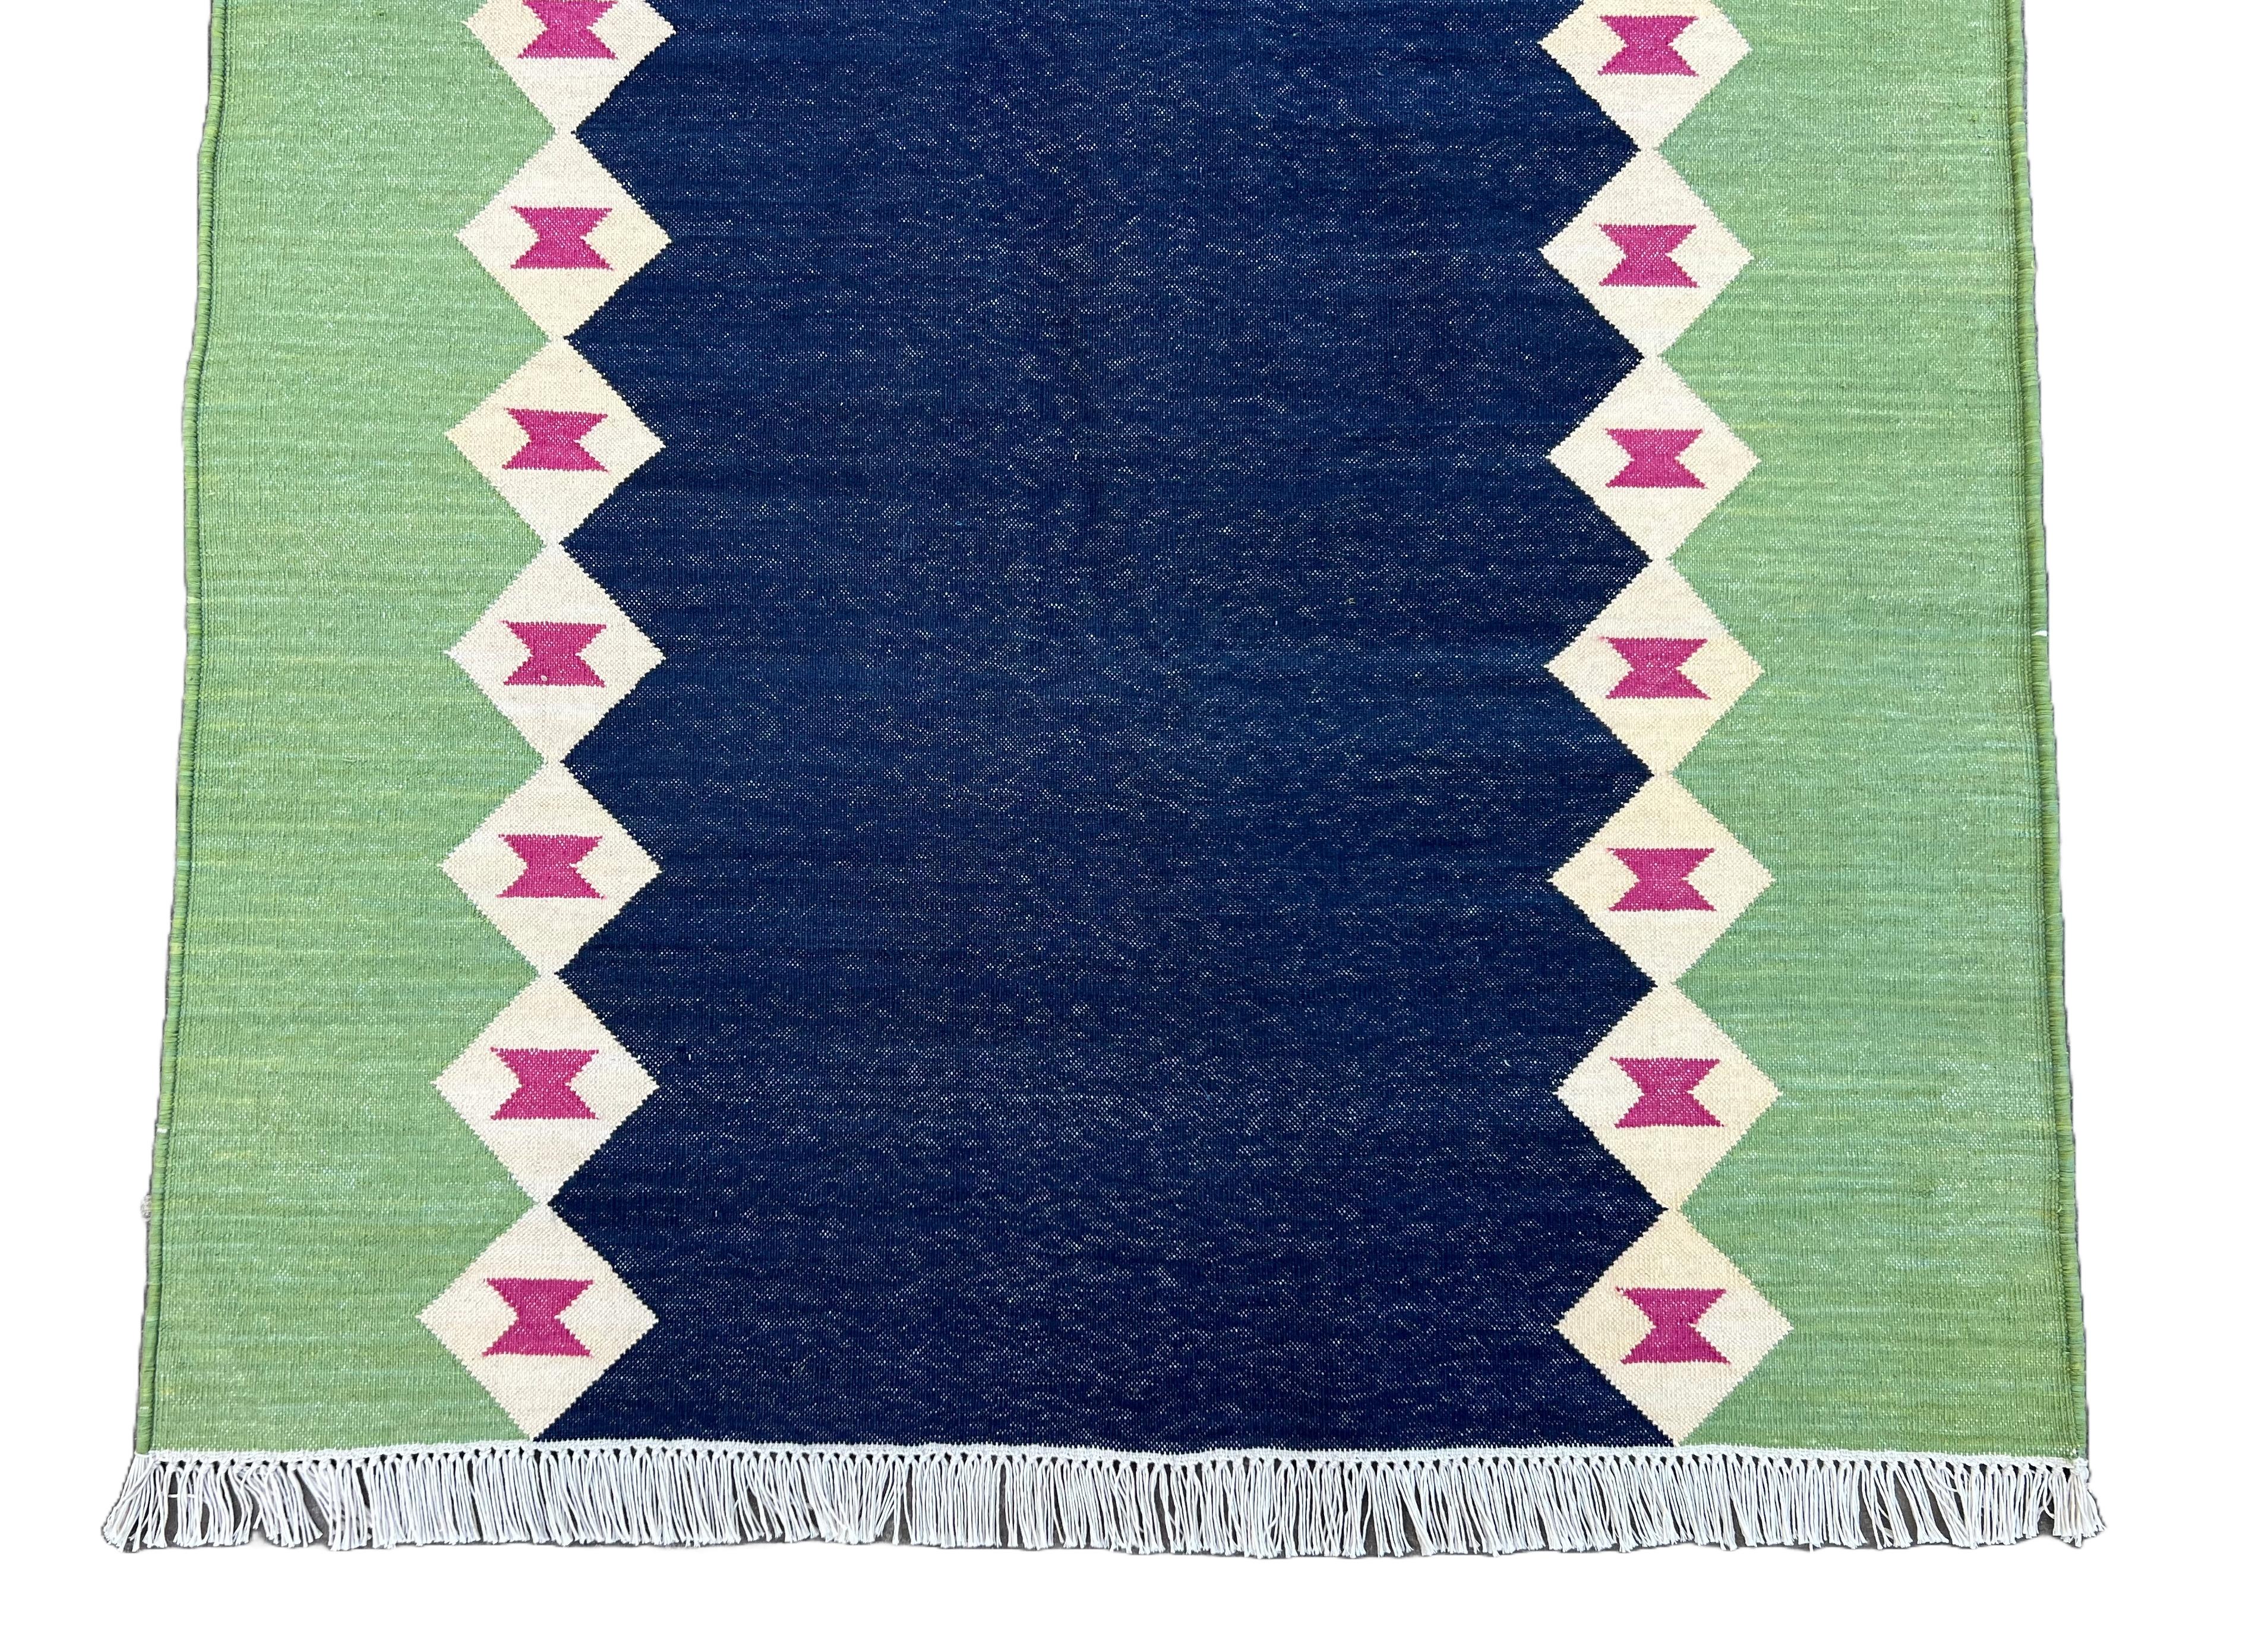 Cotton Natural Vegetable Dyed, Blue And Green Diamond Indian Dhurrie Runner-3'x10'
These special flat-weave dhurries are hand-woven with 15 ply 100% cotton yarn. Due to the special manufacturing techniques used to create our rugs, the size and color